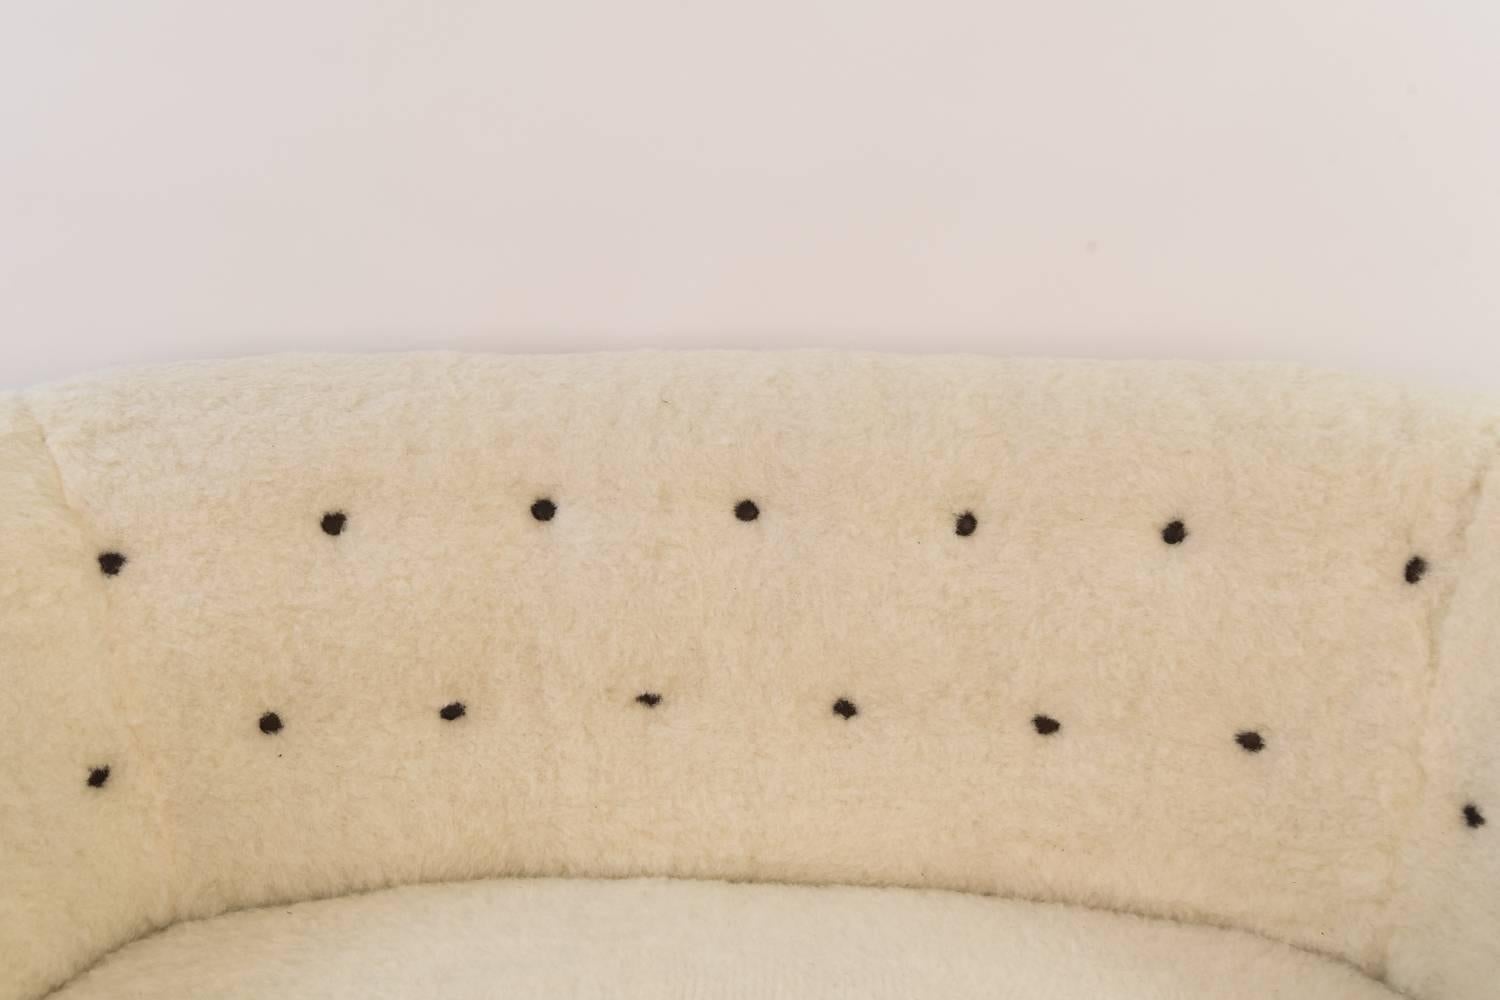 This incredible model 15 banana loveseat or two-seat sofa by Slagelse Møbelværk has been recently reupholstered in wool and features a wonderful tufted backrest with contrasting black tufts. Classic, highly coveted form in exquisite upholstery.